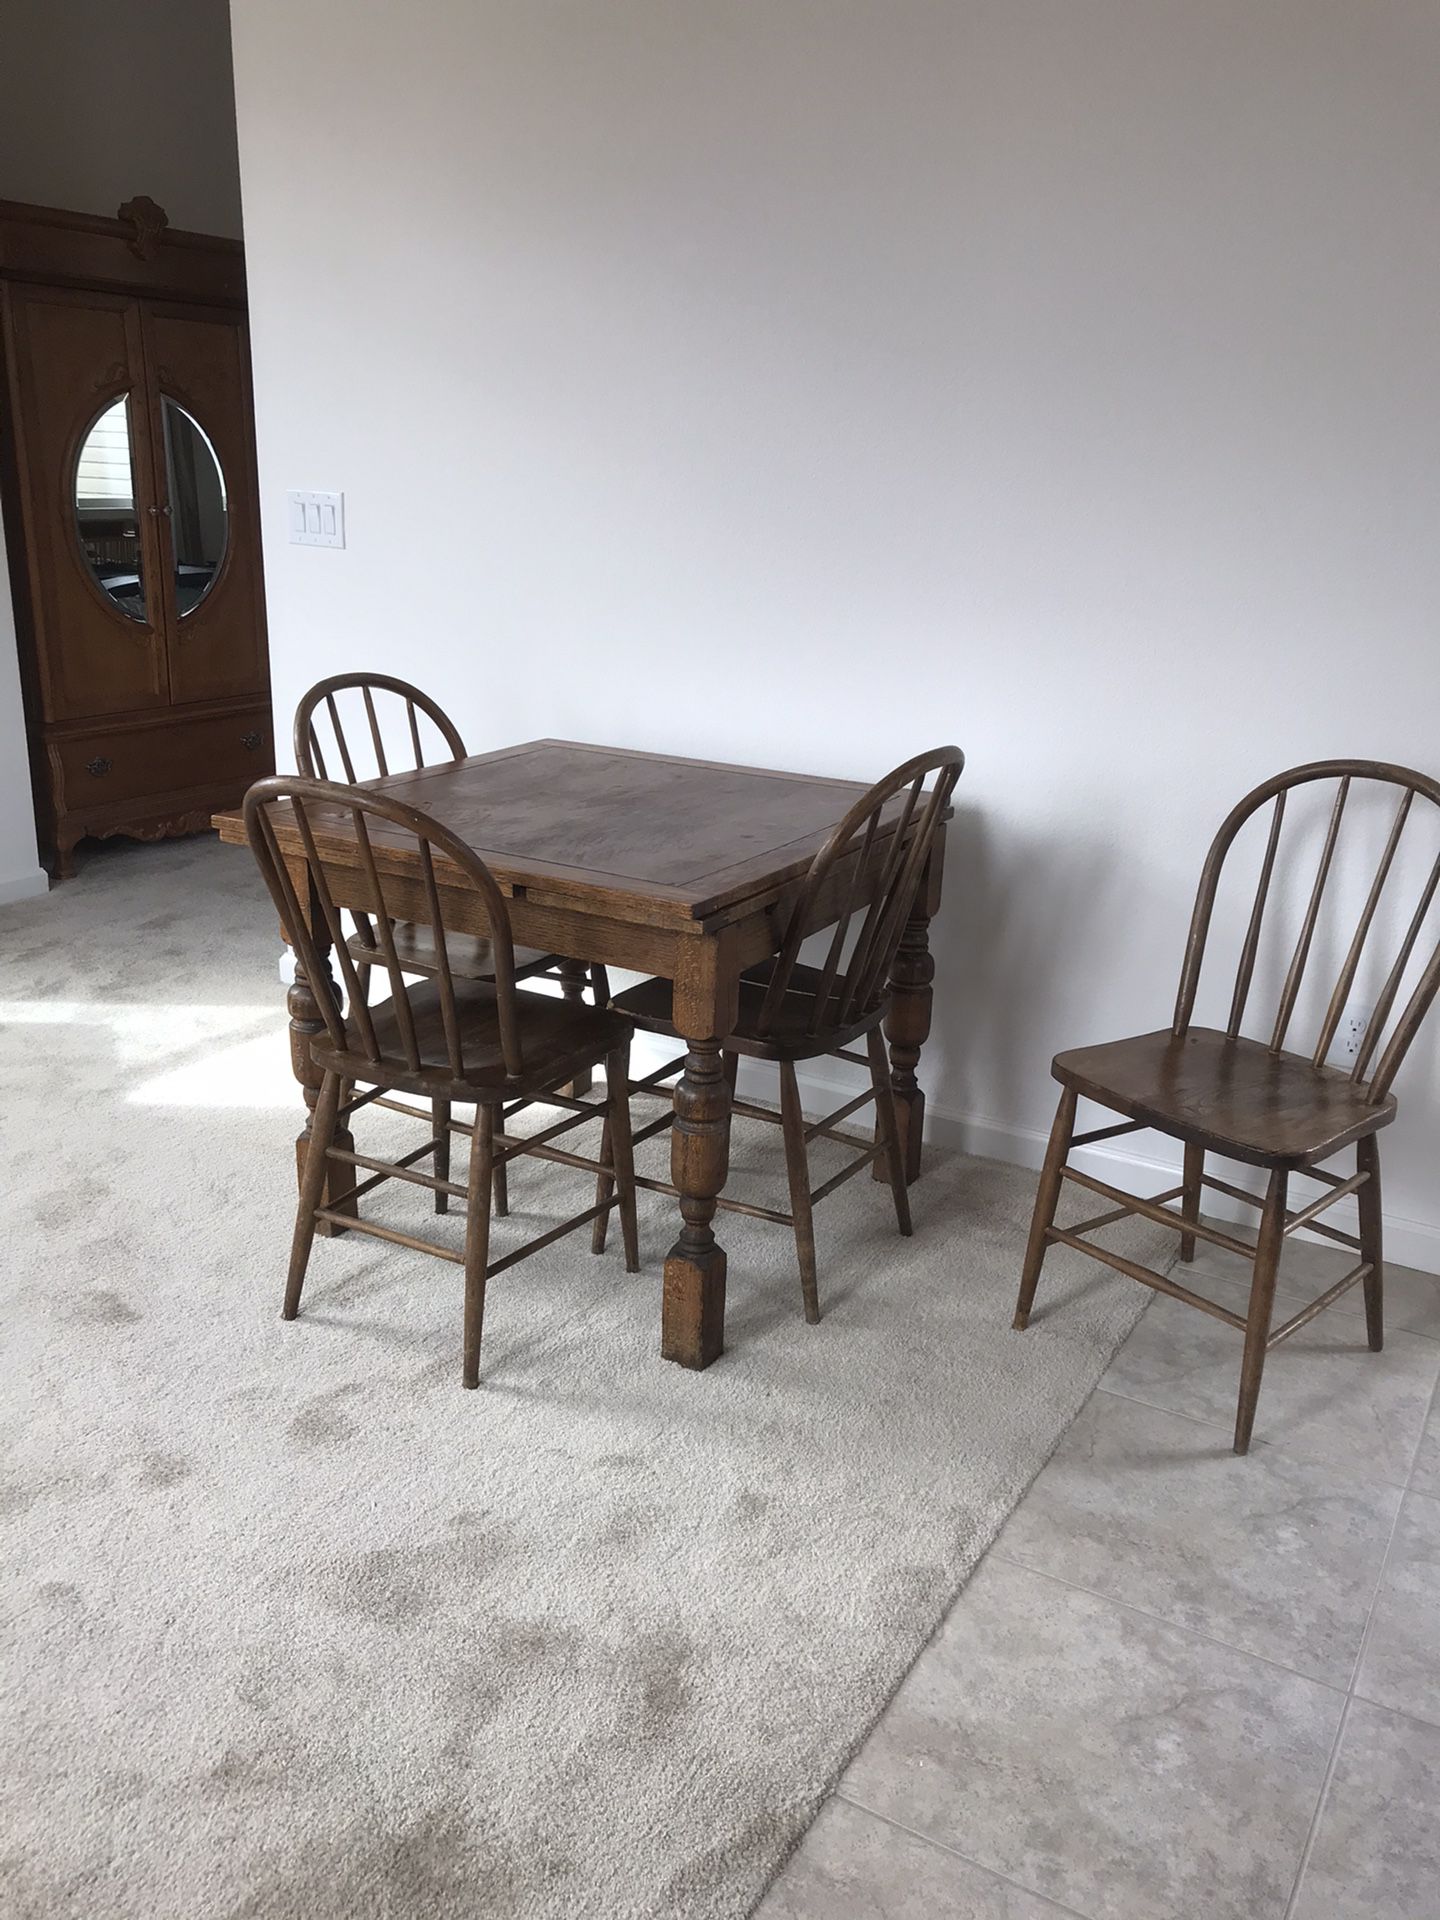 Antique Refectory Table & 4 Chairs